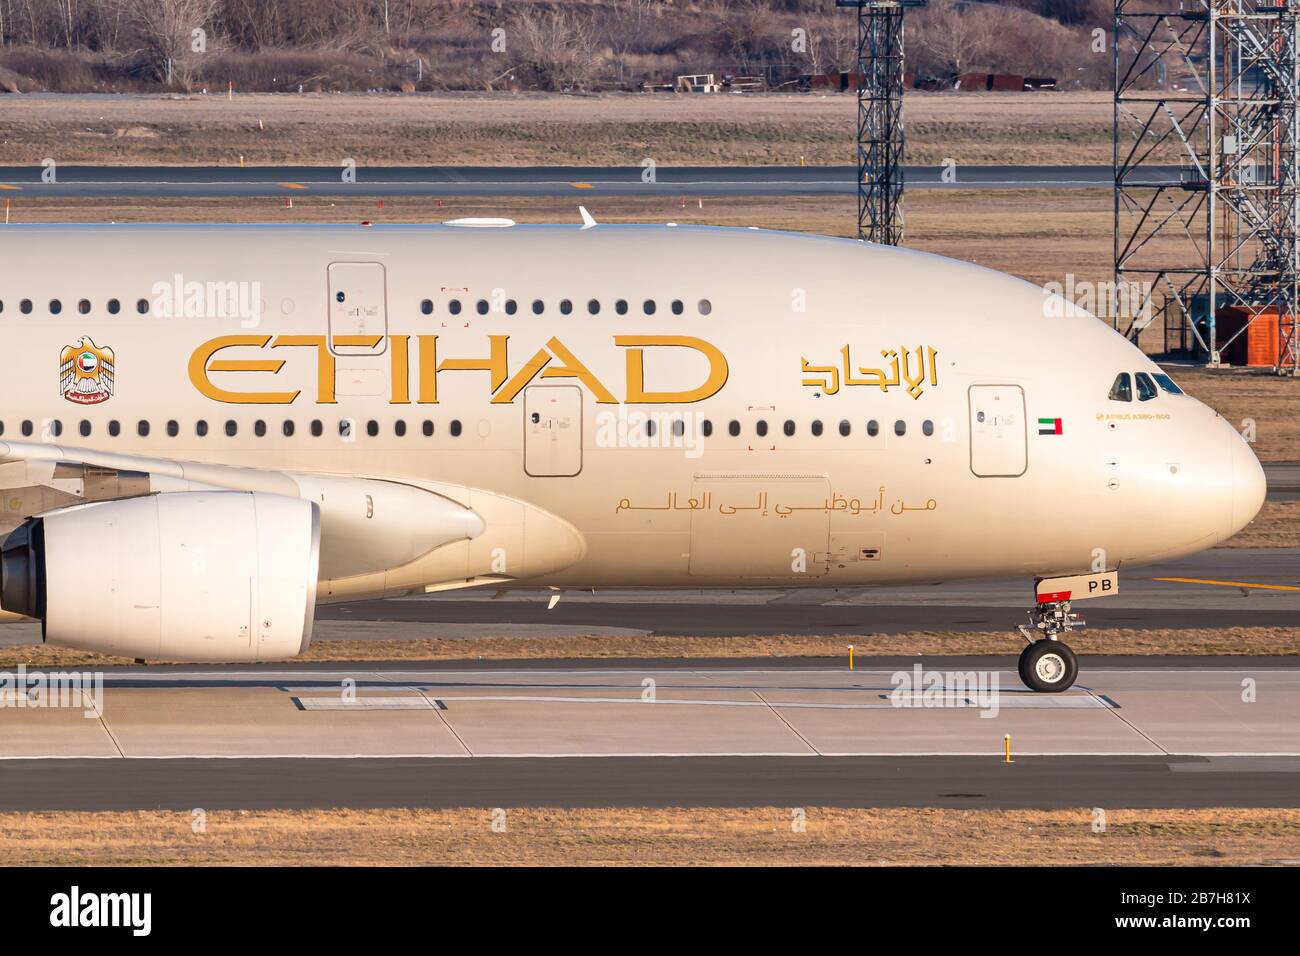 New York, USA - February 27, 2020: Etihad Airways Airbus A380-800 airplane at New York John F. Kennedy airport (JFK) in the USA. Airbus is an aircraft Stock Photo